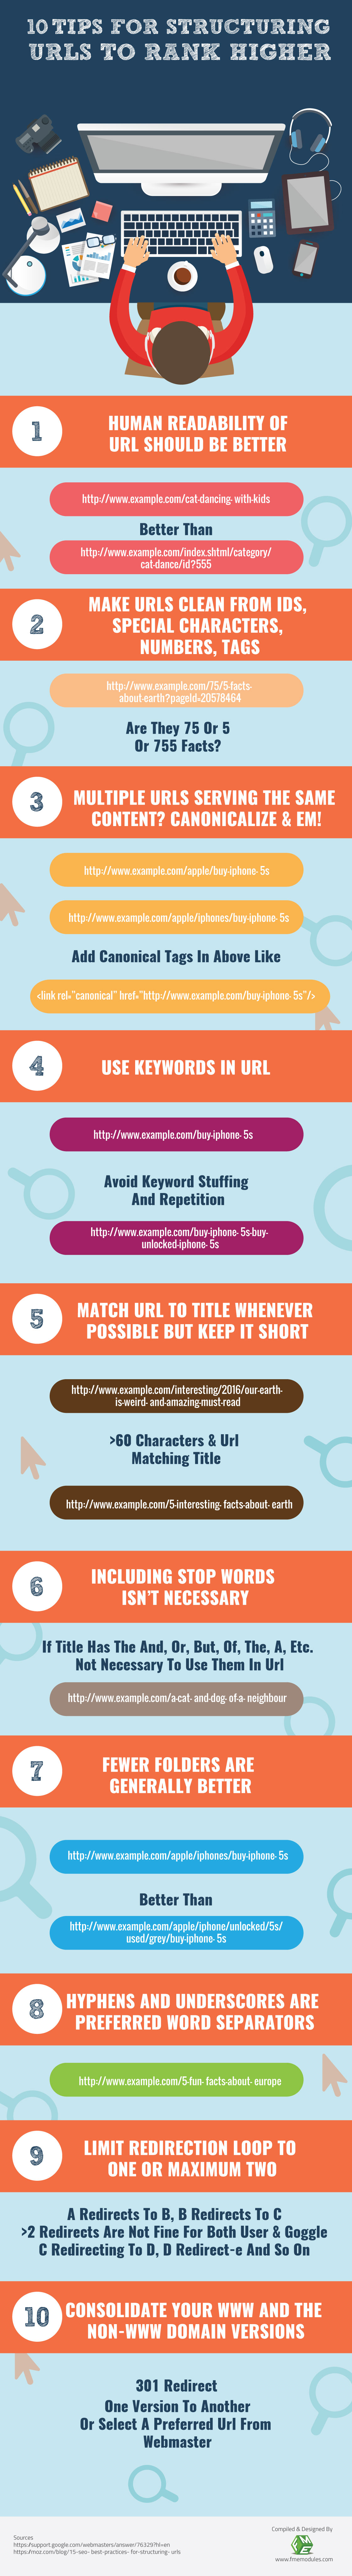 How to Optimize Your URLs for SEO